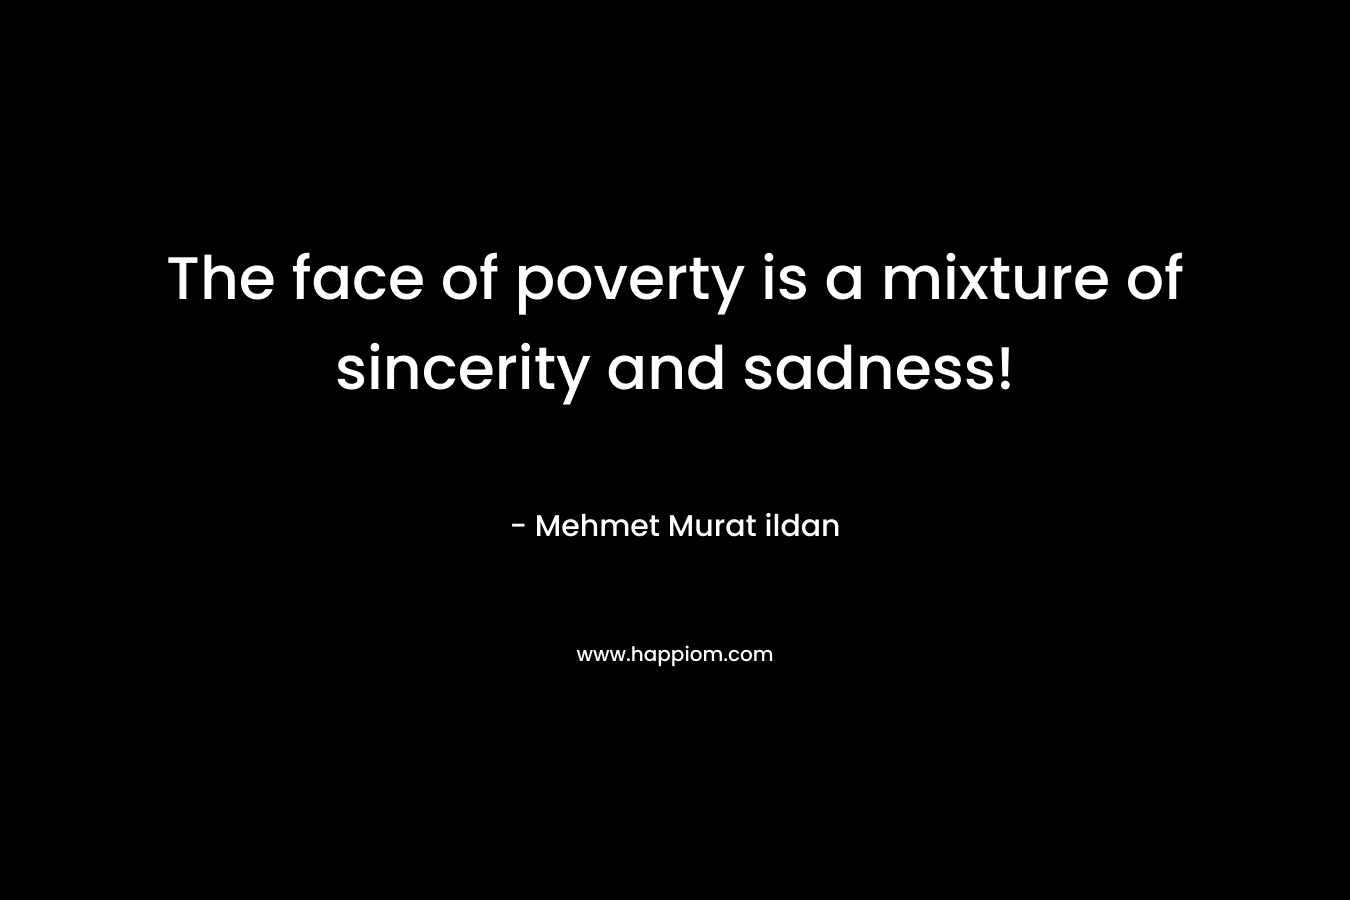 The face of poverty is a mixture of sincerity and sadness! – Mehmet Murat ildan